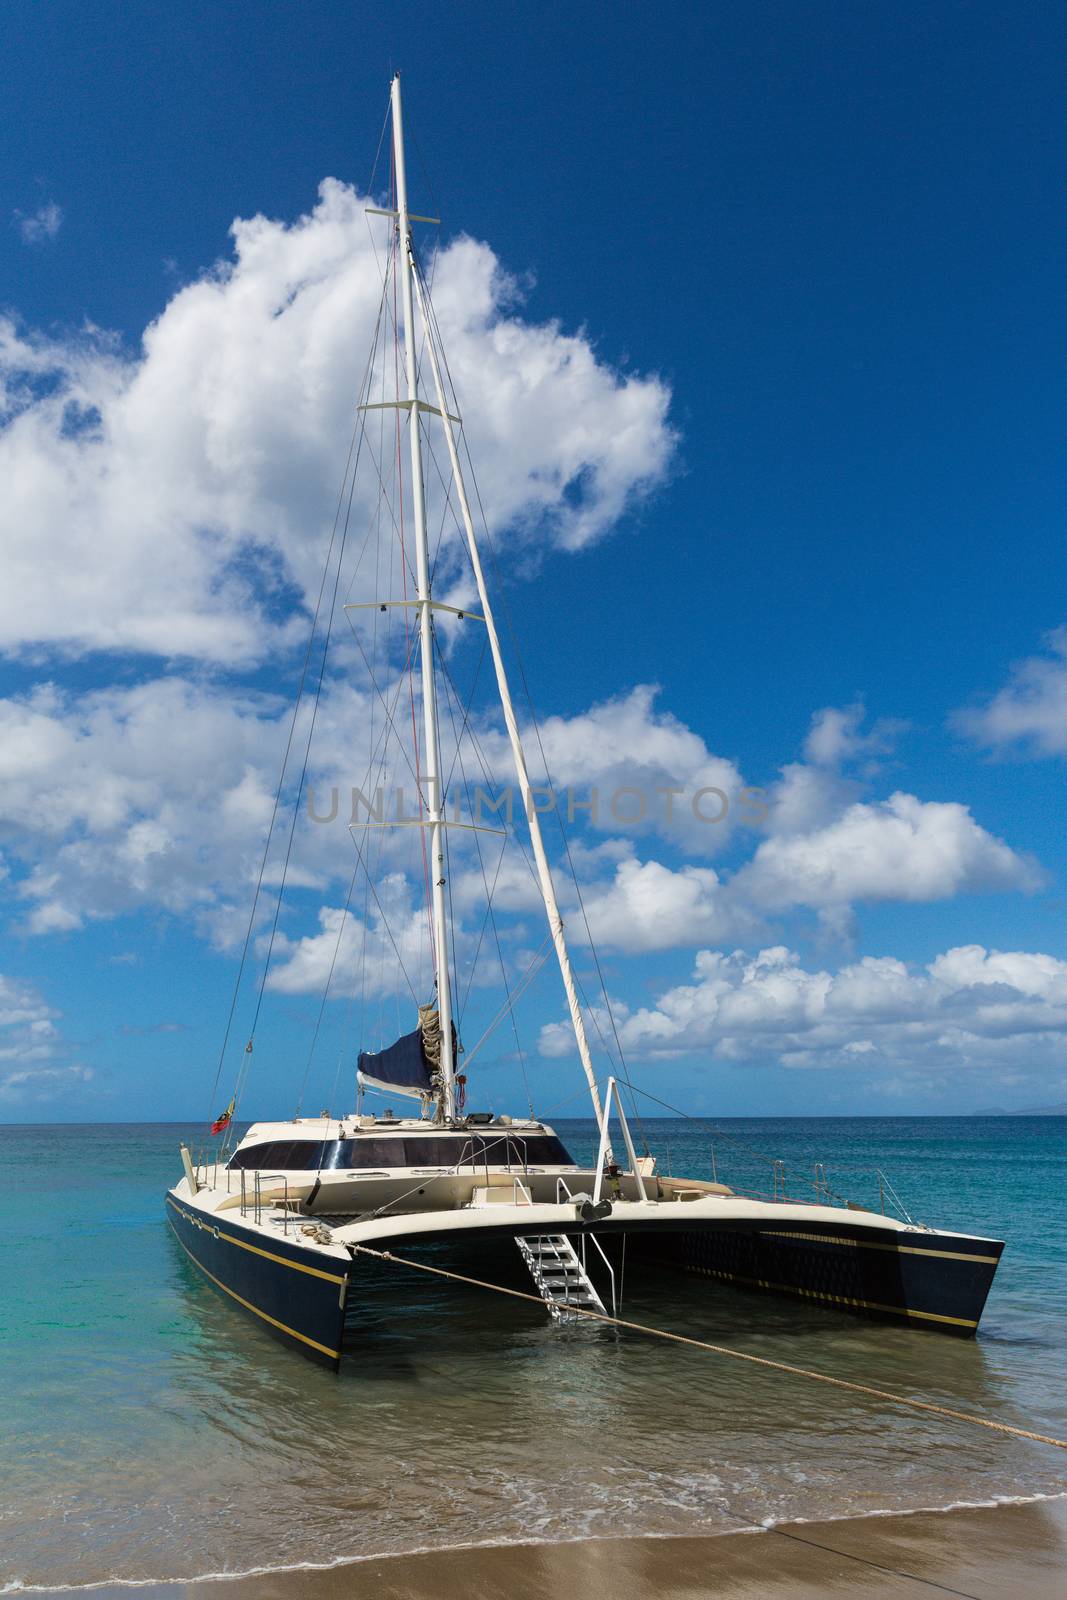 Portrait style of a catamaran off the beach at St Nevis near St Kitts by chrisukphoto